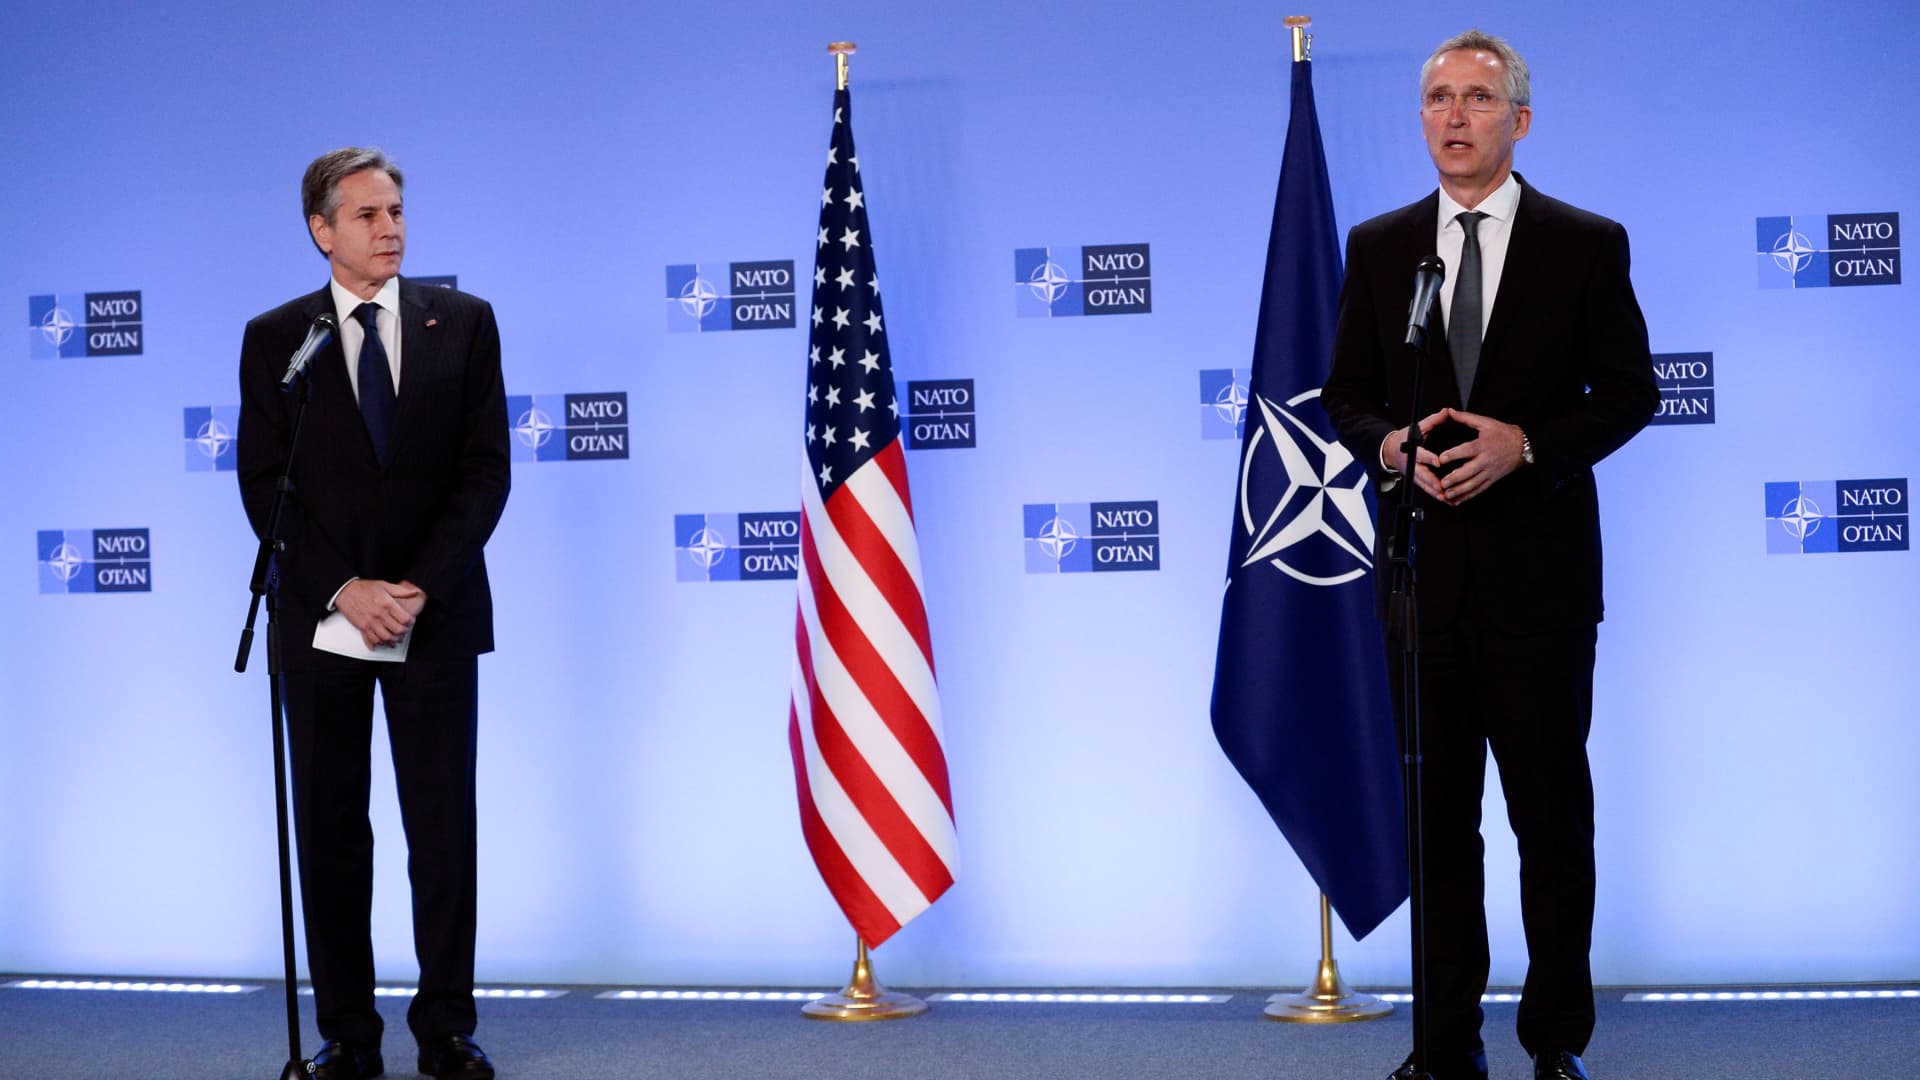 NATO Secretary General Jens Stoltenberg delivers a statement as he meets with U.S. Secretary of State Antony Blinken in Brussels, Belgium, April 14, 2021.